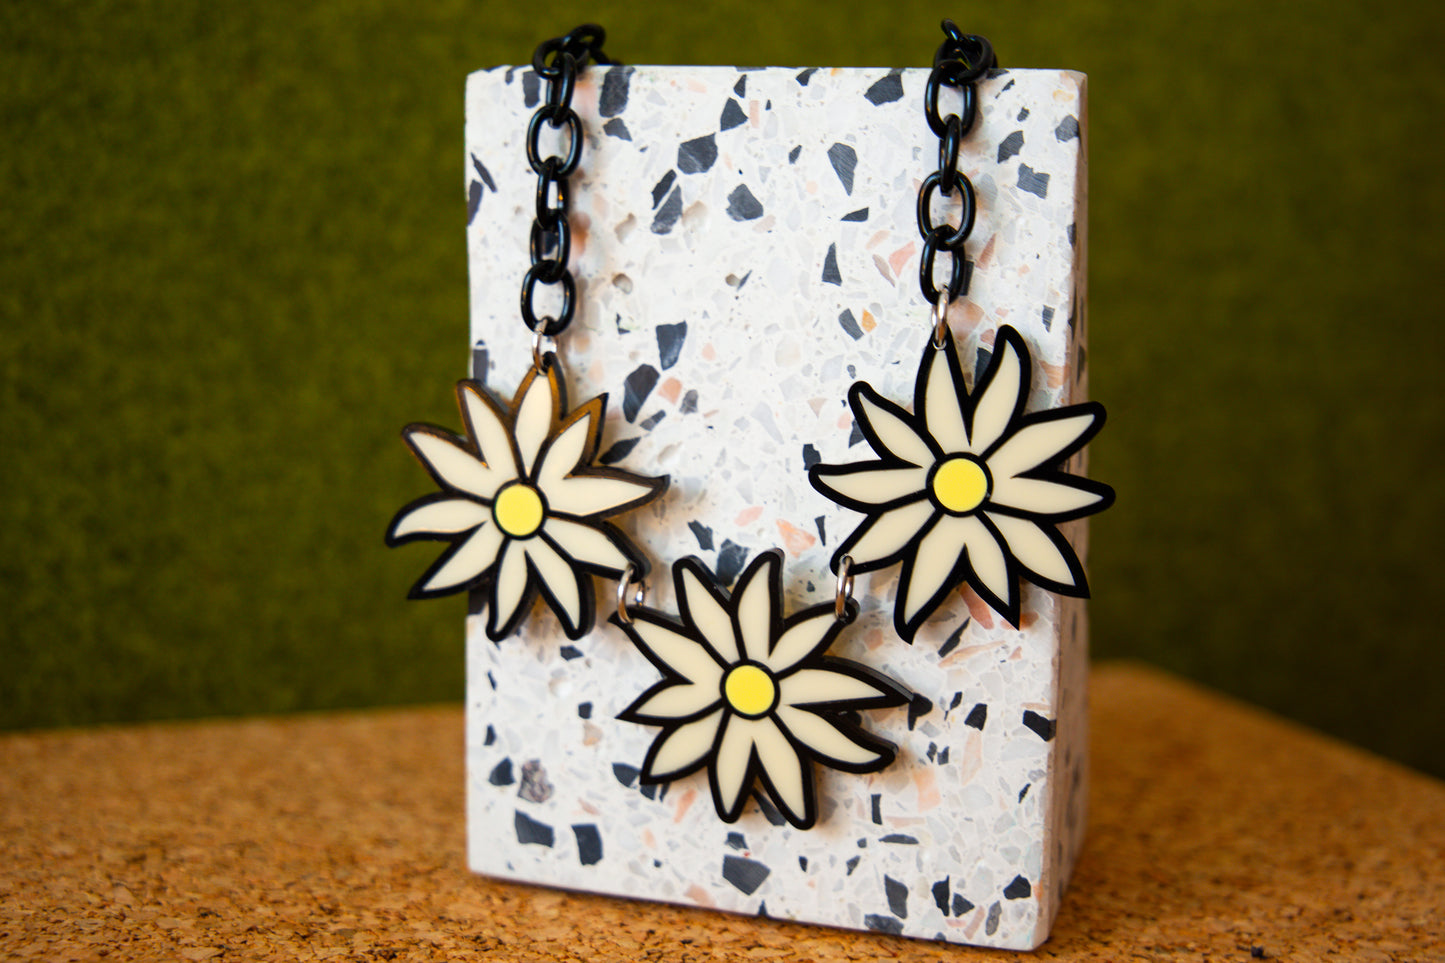 Flannel Flower necklace